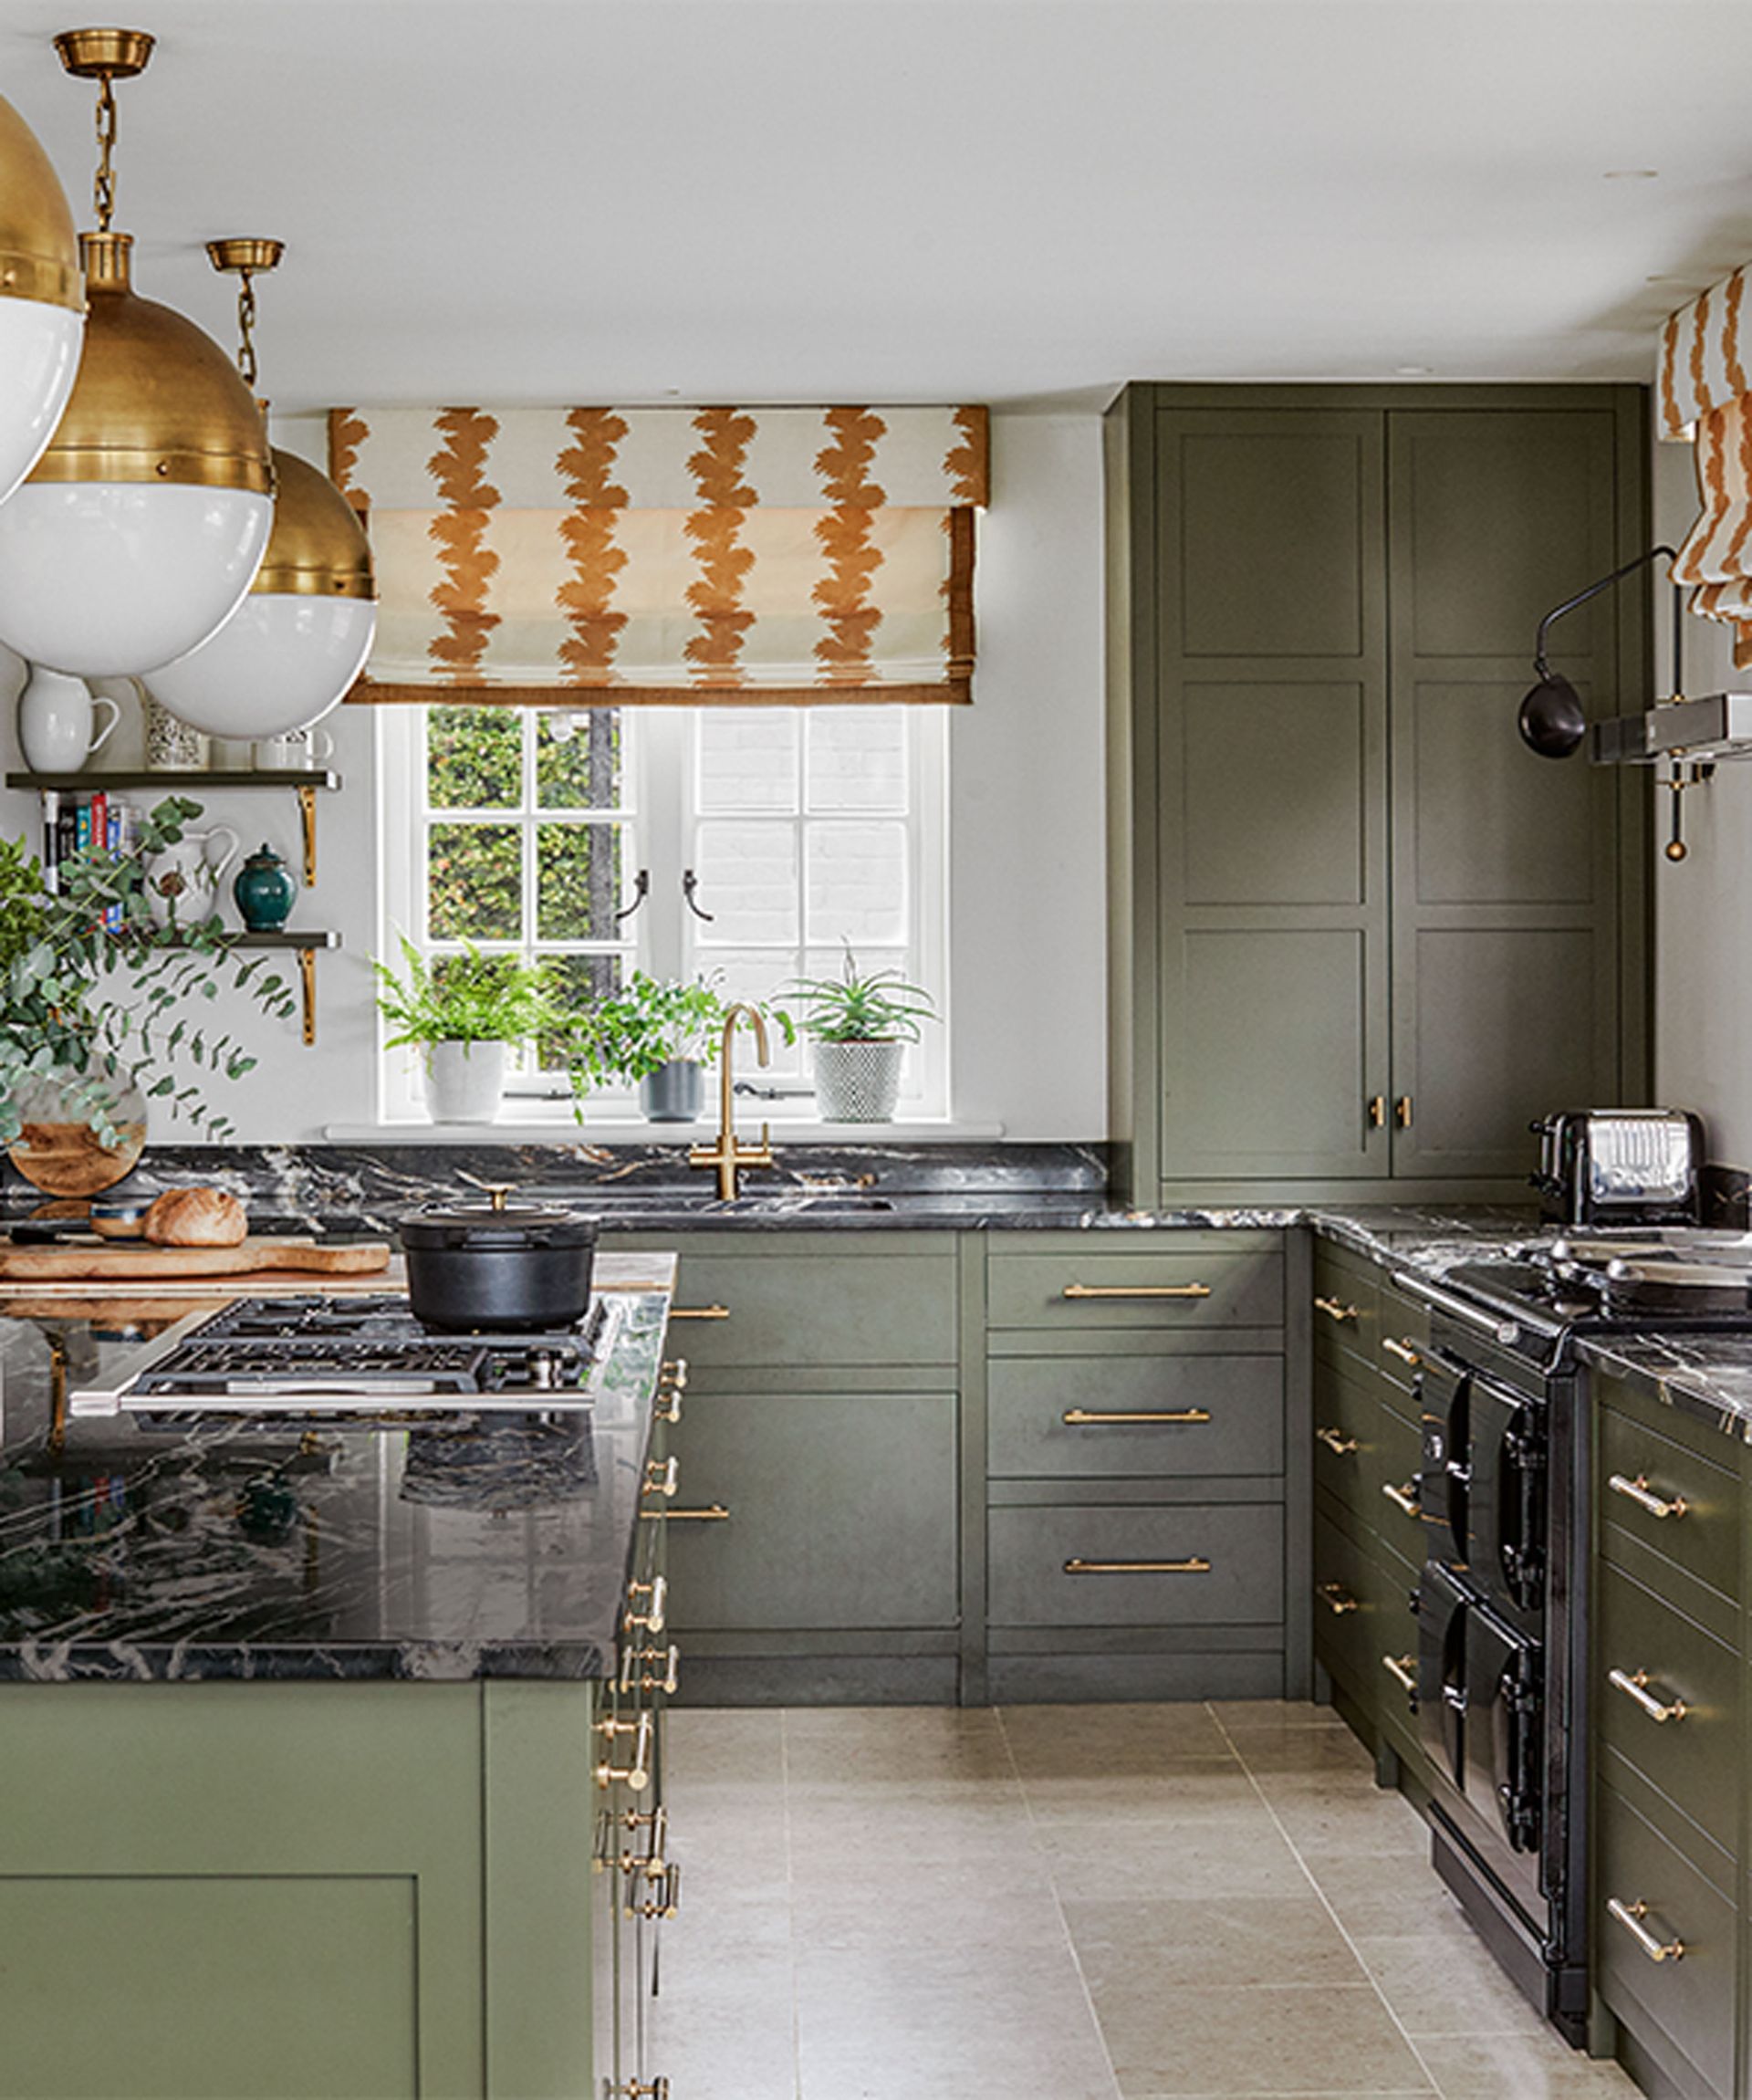 <p>                     Finishing details are key and can be an easy way of giving a plain-colored kitchen a luxe, modern touch. This classic olive green painted kitchen by RW Armstrong feels warm and grounded, but is given an extra dash of glamor by the addition of brass accents on lighting, handles, faucet and window blind fabric.                    </p>                                      <p>                     ‘Pure White is always on our bestsellers list but it’s been really interesting to see some newcomers which are full of confident color,’ says Dominic Myland, CEO of Mylands paints. ‘Messel No.39 is a new entry and is an intense rich olive and an interpretation of a color used by Oliver Messel the English artist and one of the foremost stage and screen designers of the 20th century.’                   </p>                                      <p>                     ‘We’ve seen greens in general surging in popularity over the last year,’ adds Dominic. ‘For homes that are decorated with palettes of greys, navy blue or red, olive green is a great tone to add warmth to an interior.’                   </p>